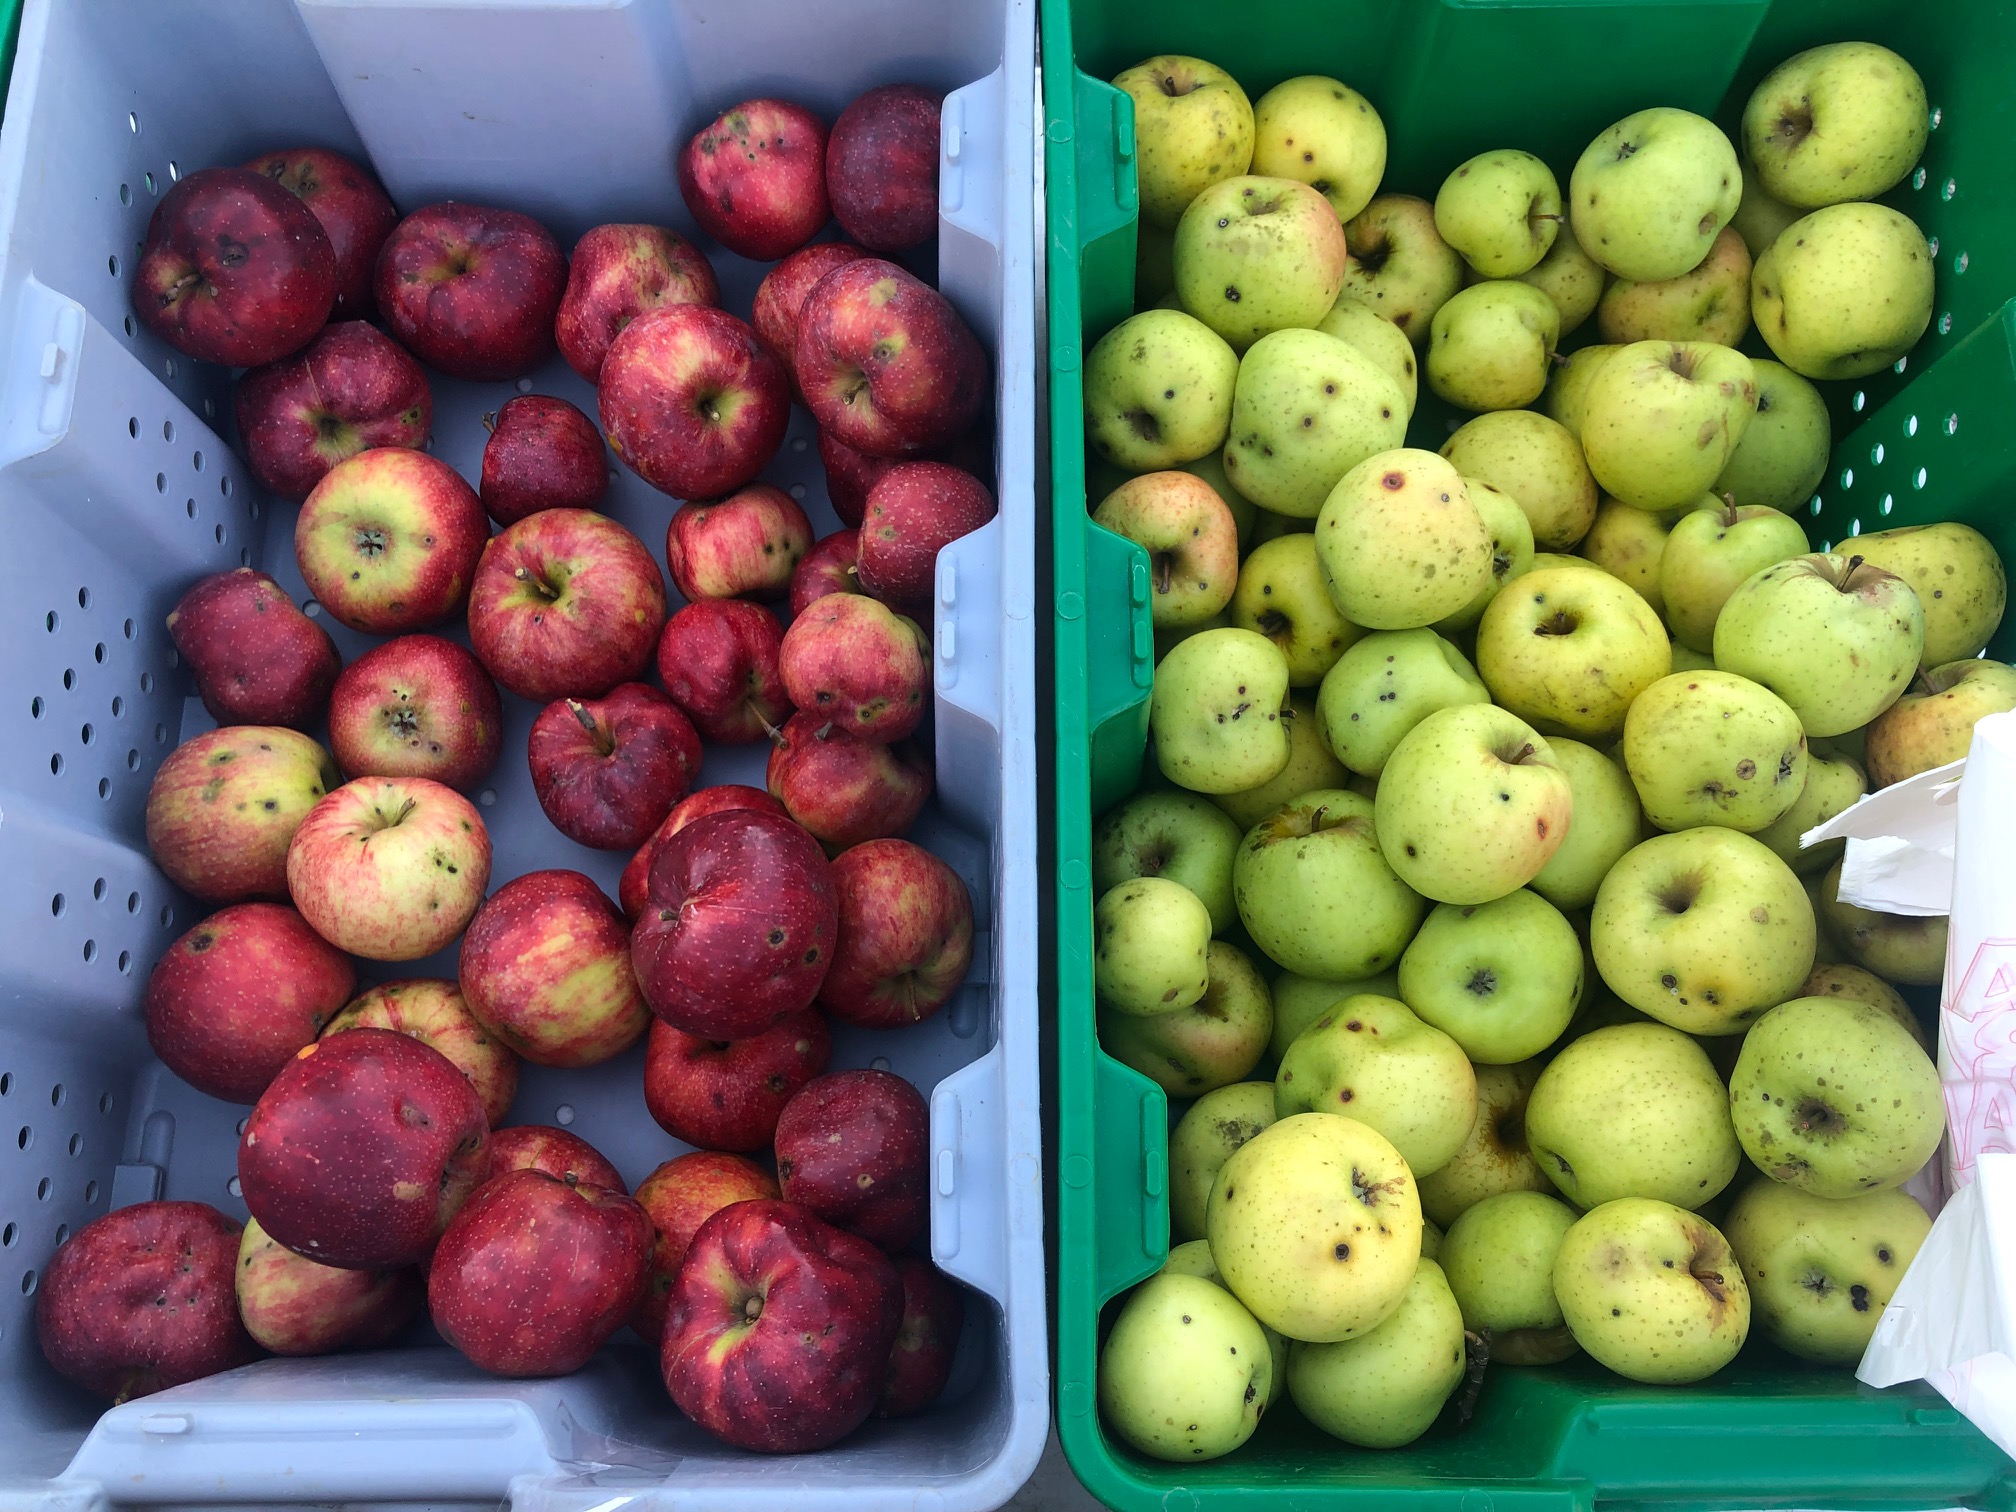 In plastic containers, red apples are on the left side and yellow apples dotted with marks are seen from above. Photo by Alyssa Buckley.